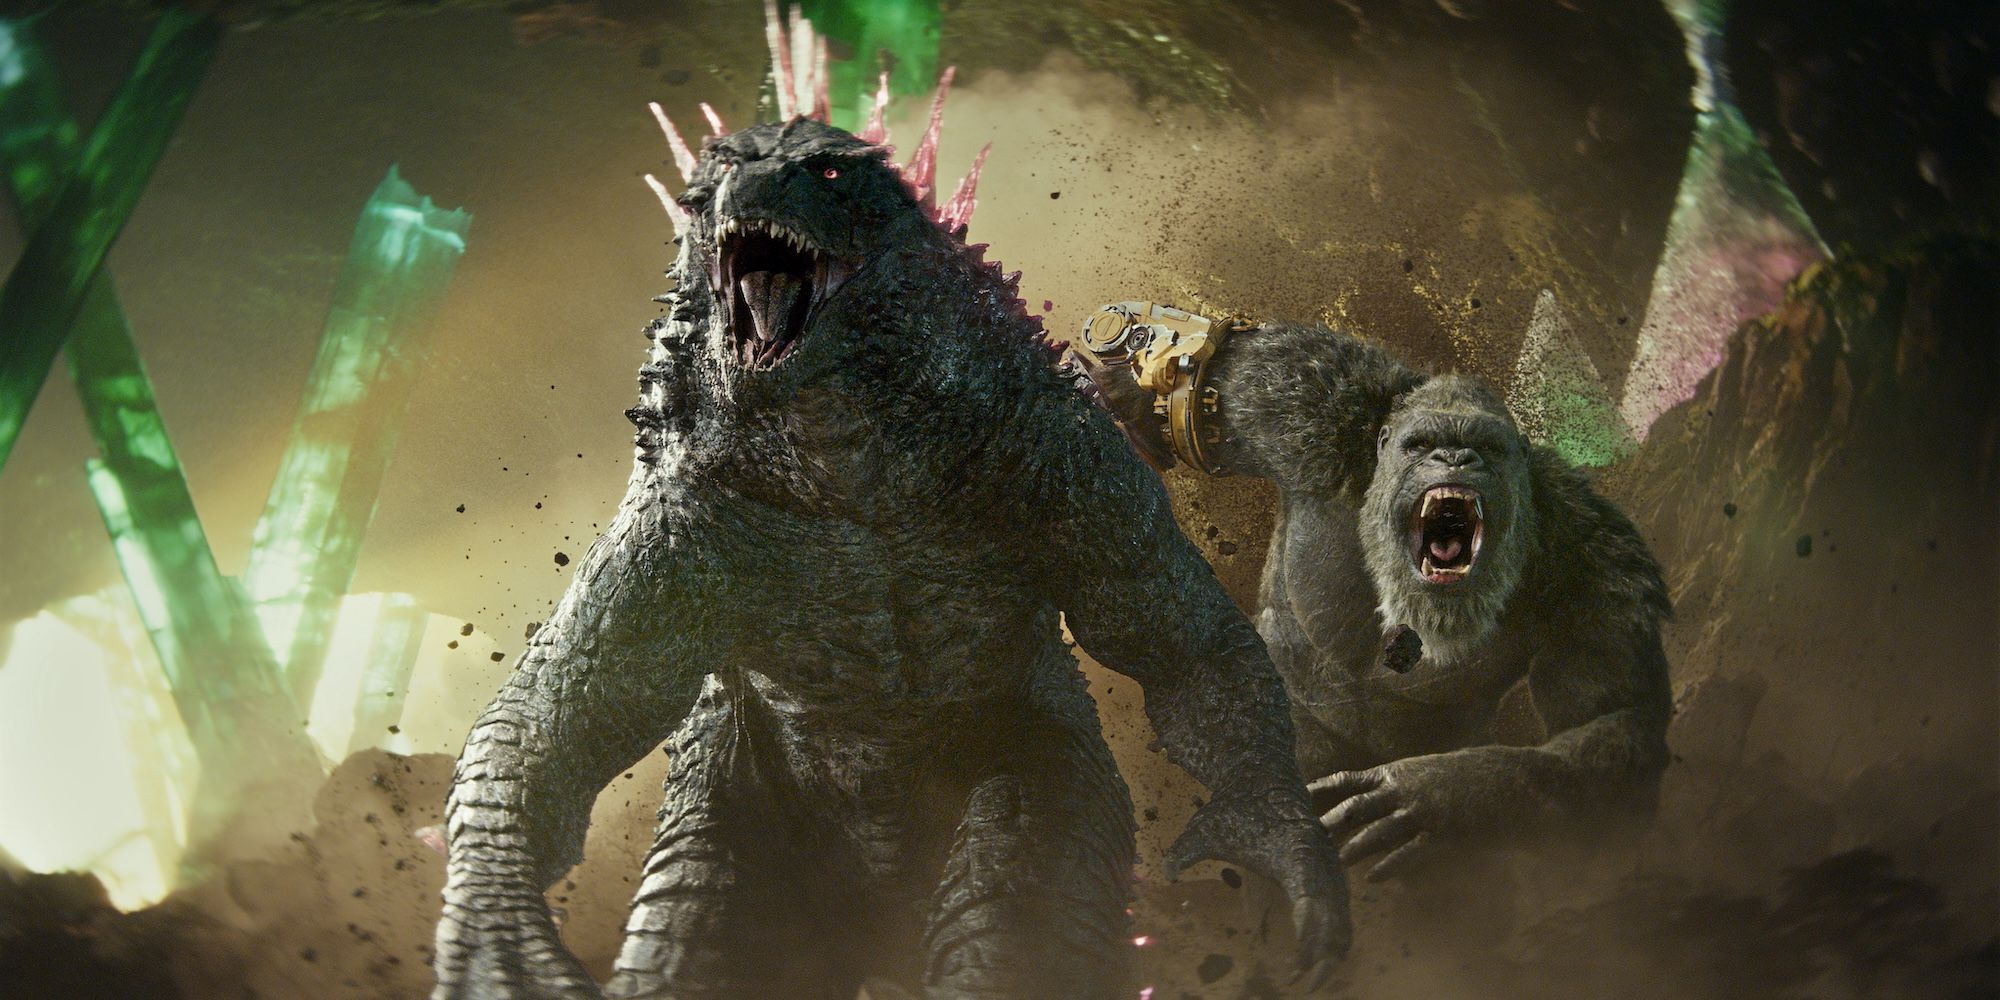 Godzilla x Kong Box Office Scores Monsterverse’s Best Opening In 10 Years